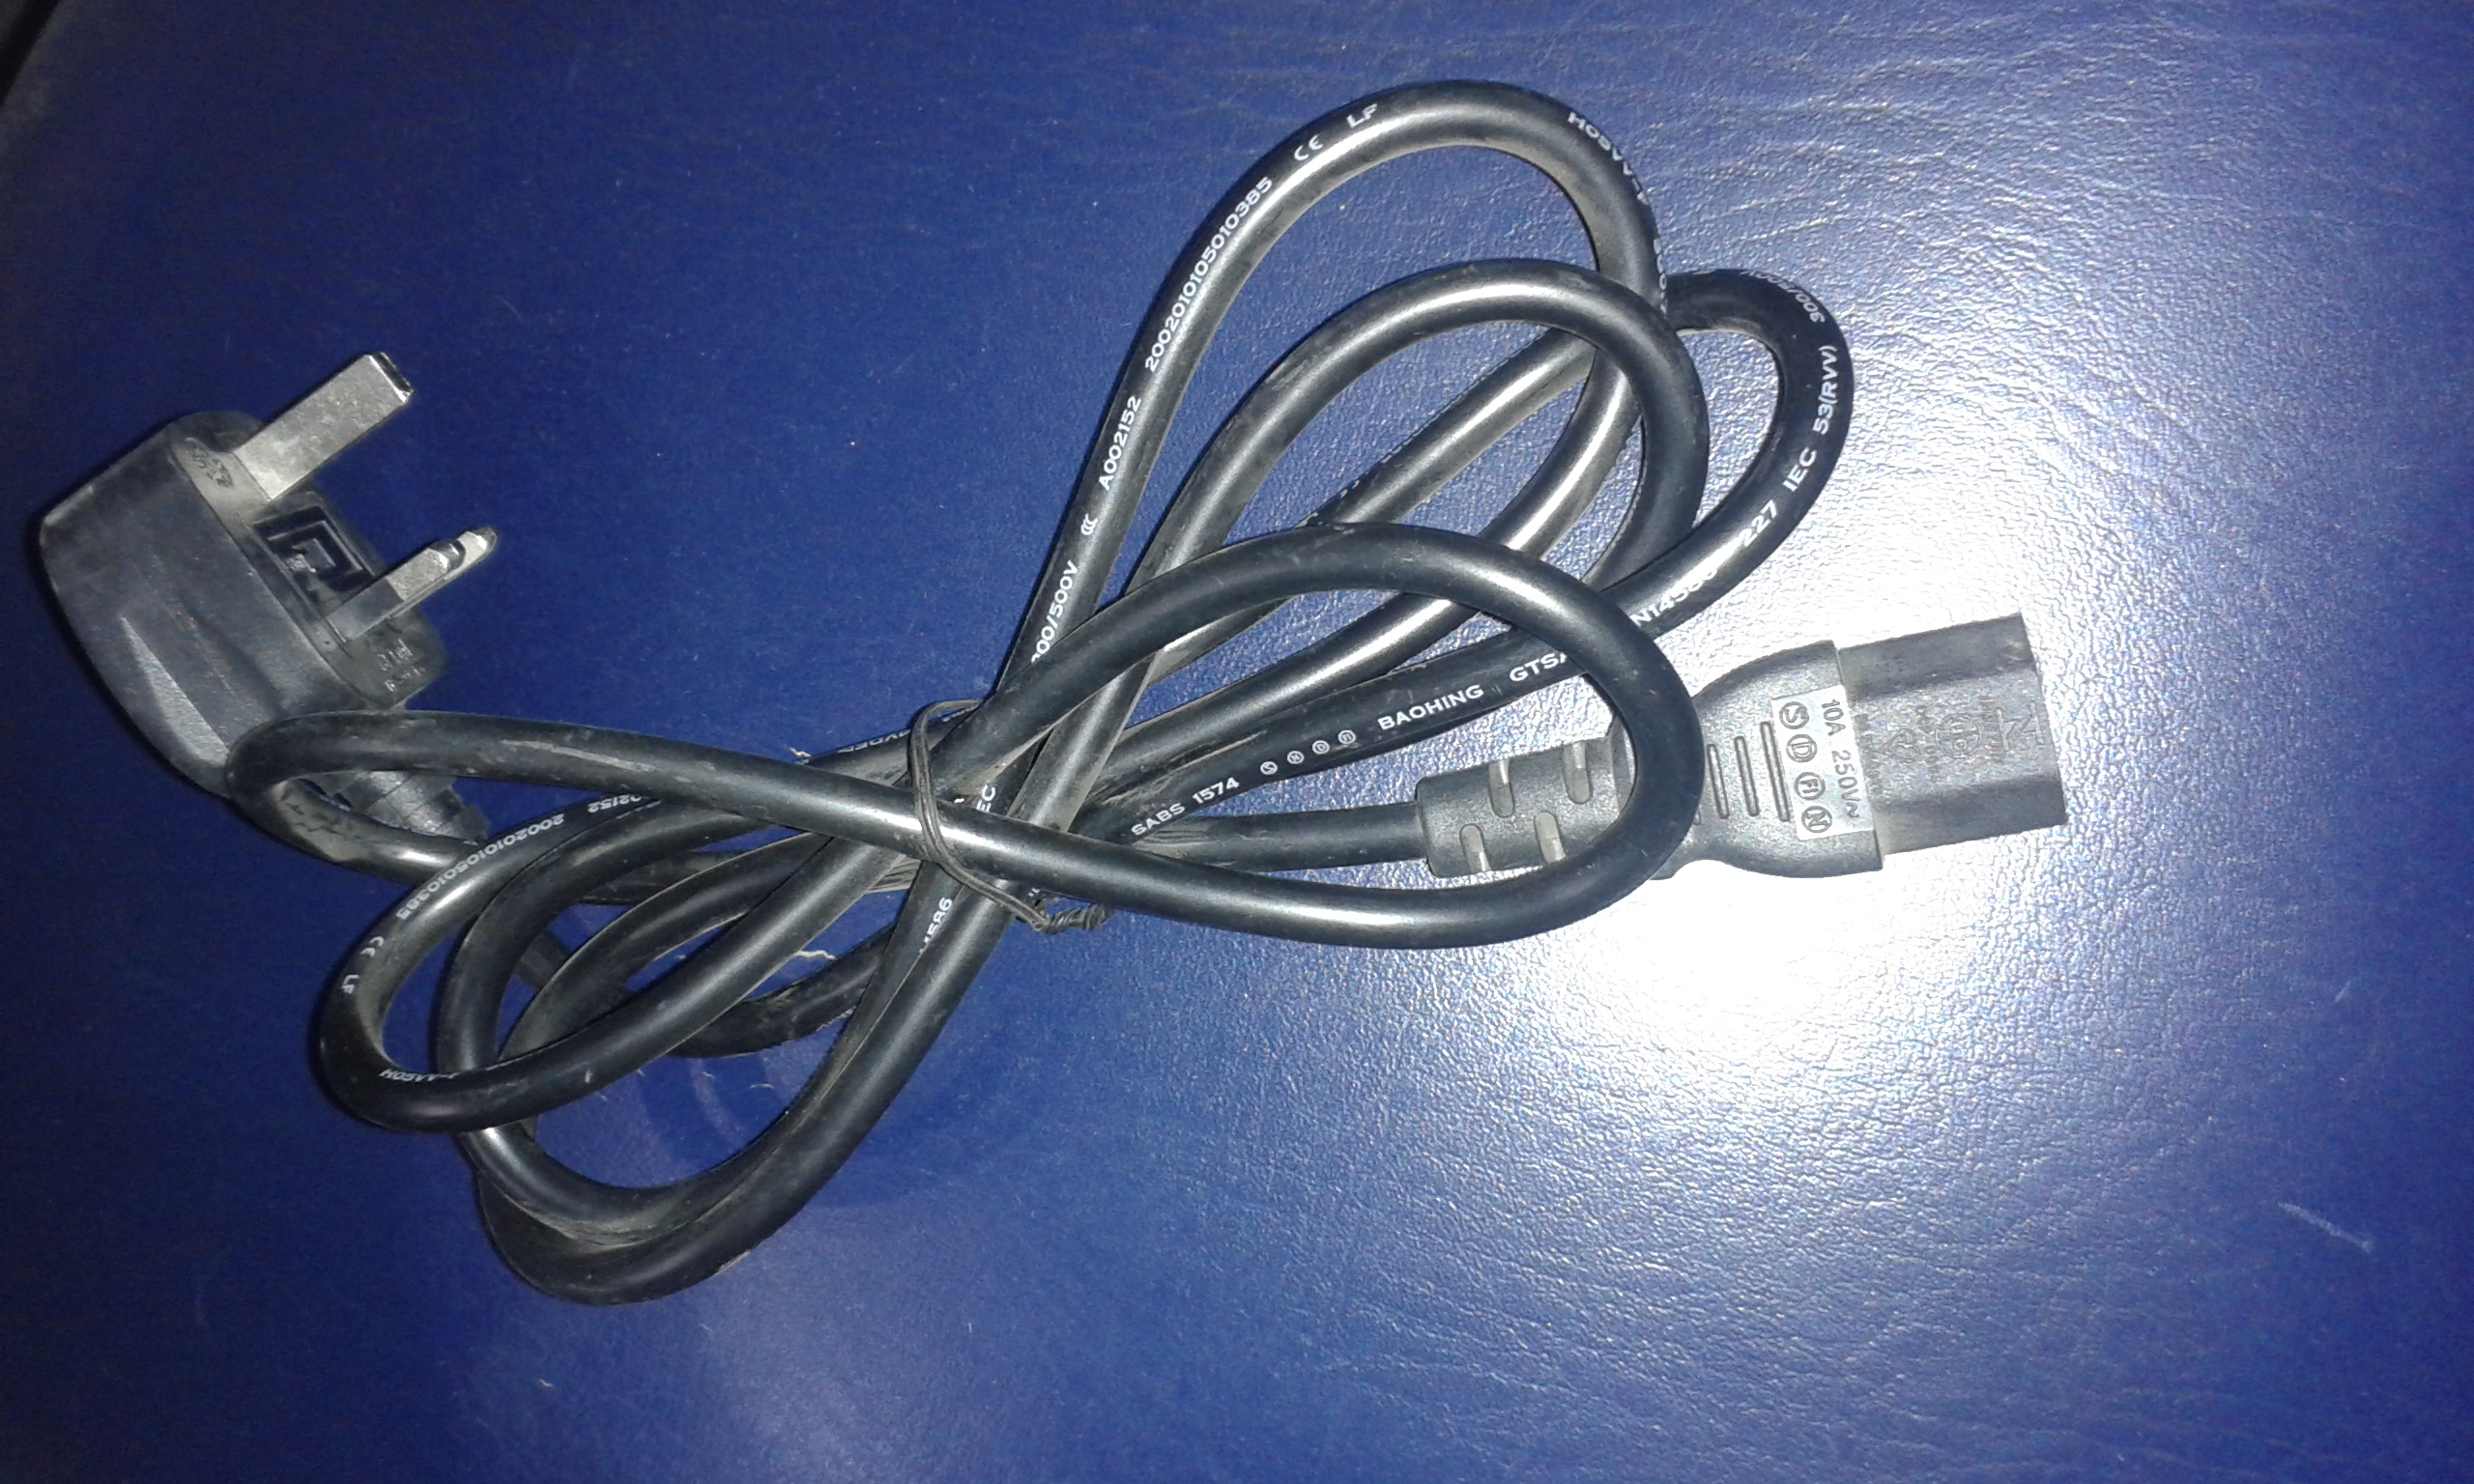 PC Power Cables Branded